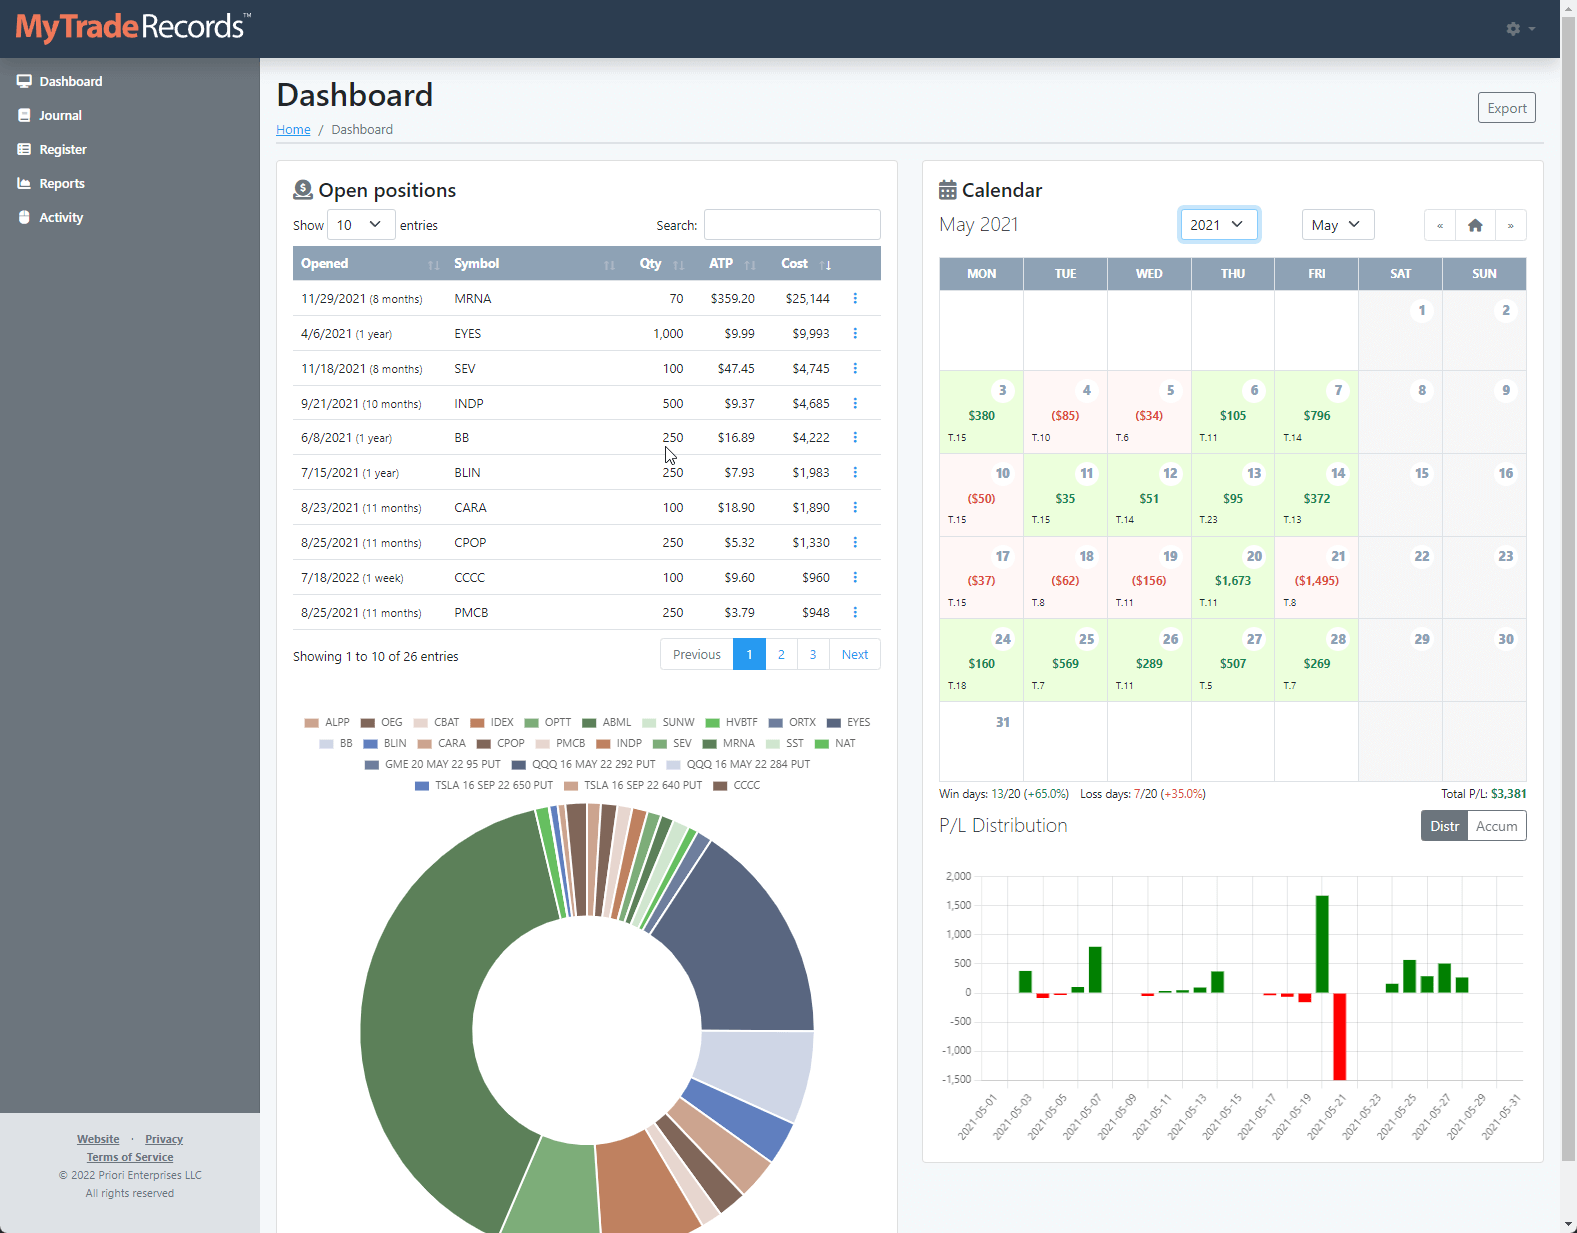 Dashboard with open positions